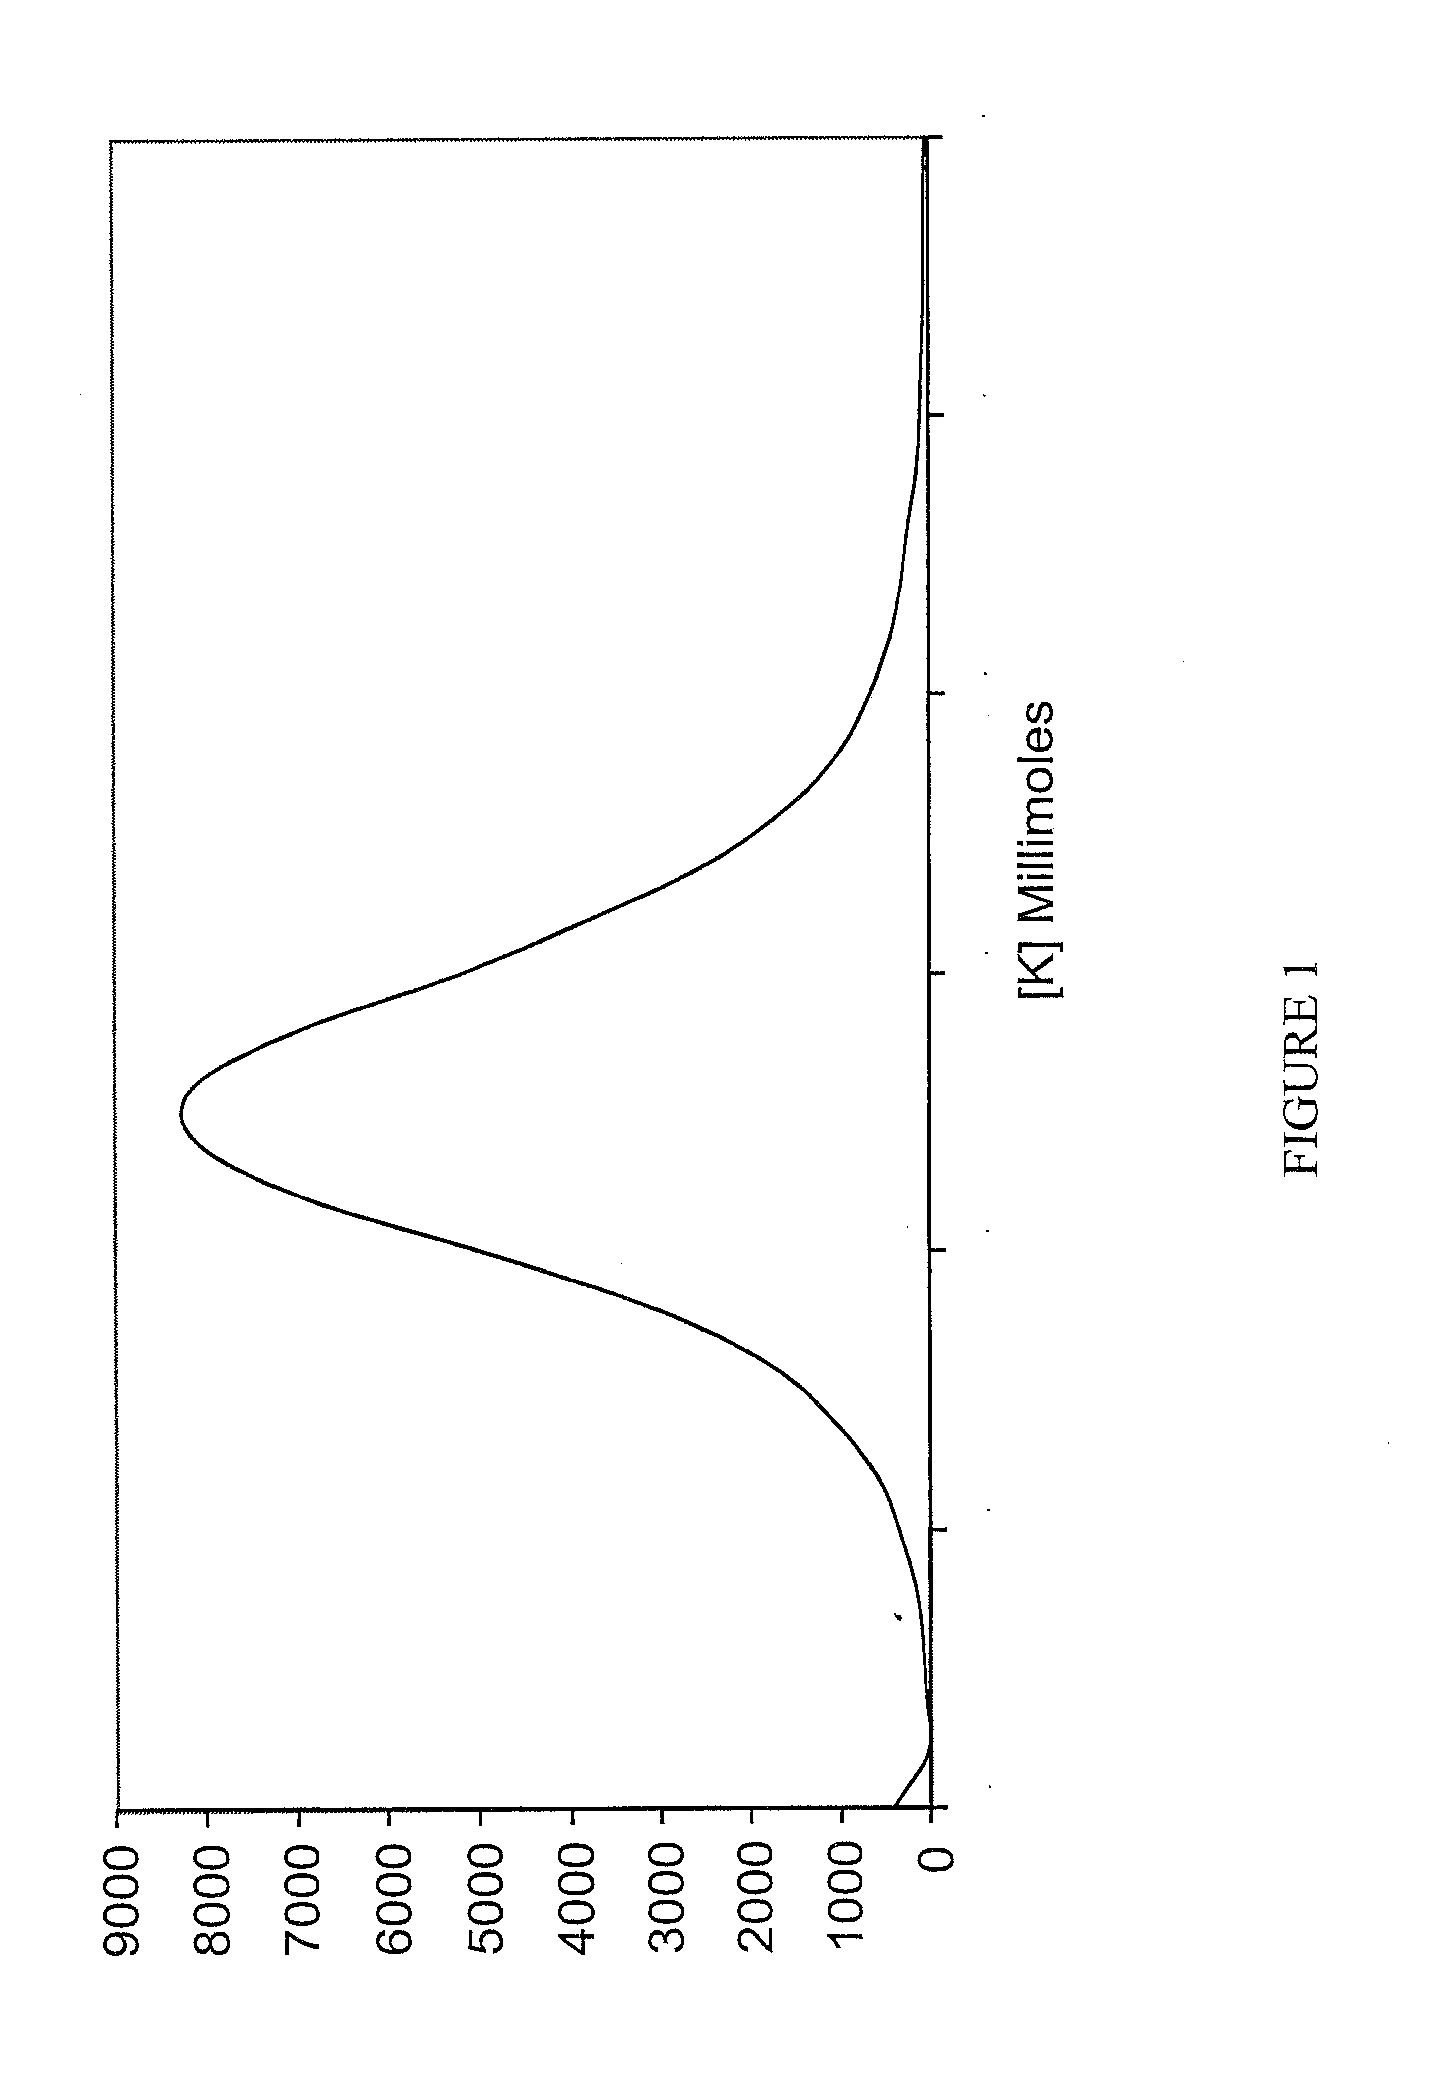 Automated Calibration Method and System for a Diagnostic Analyzer